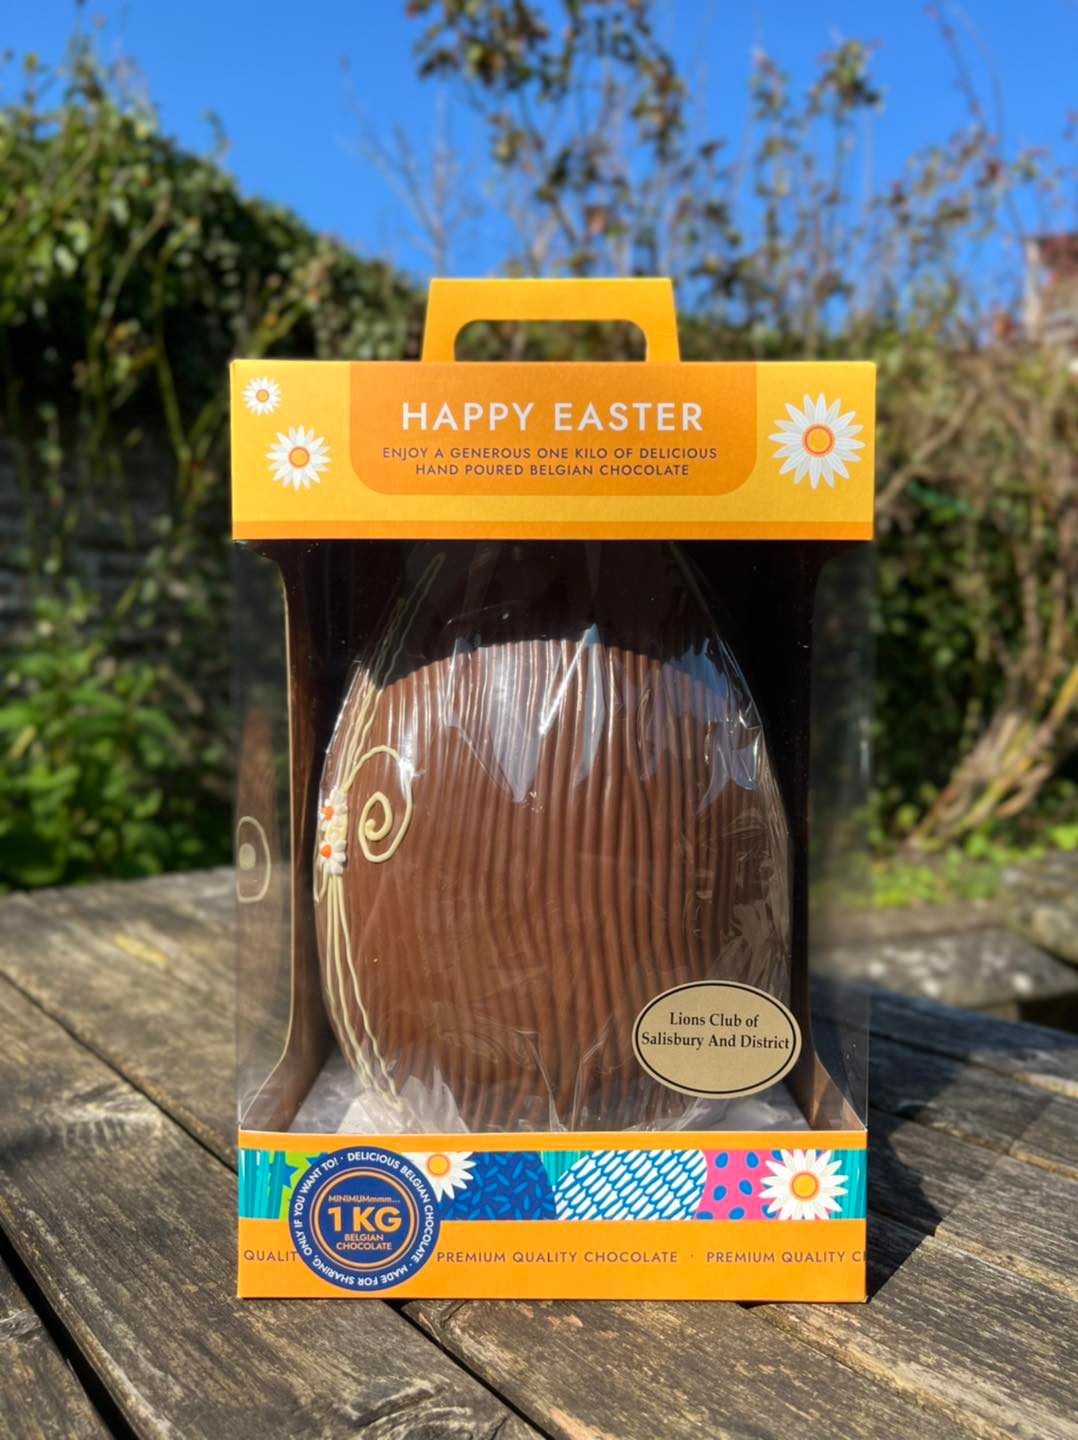 🍫 WIN A KILO OF CHOCOLATE THIS EASTER!